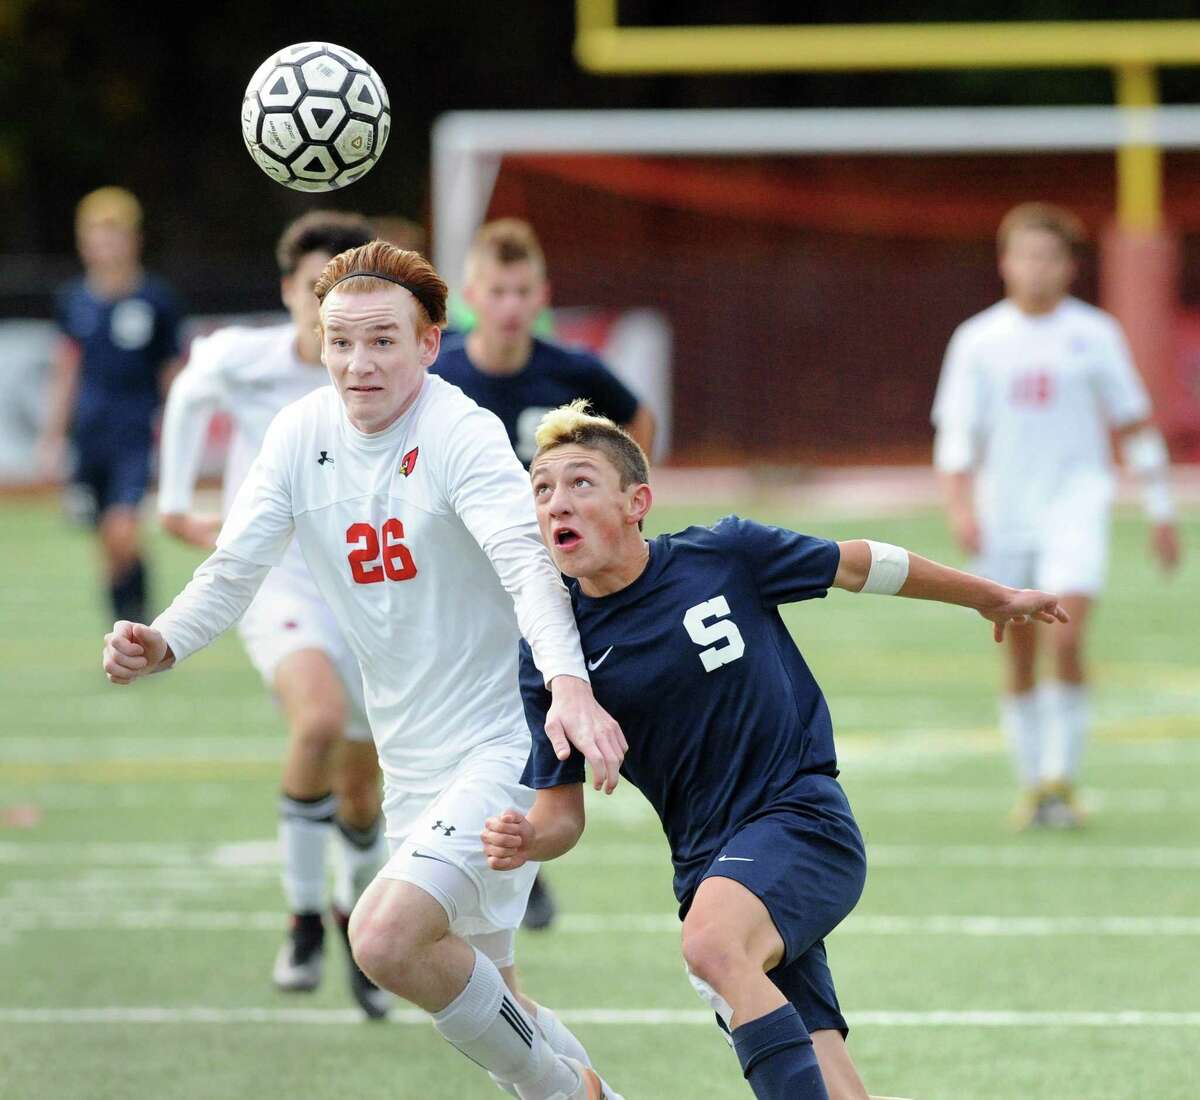 Greenwich’s Bennett Tiedy (26) goes for the ball against Staples attacker Vaughan Sealey during their FCIAC quarterfinal game on Thursday.